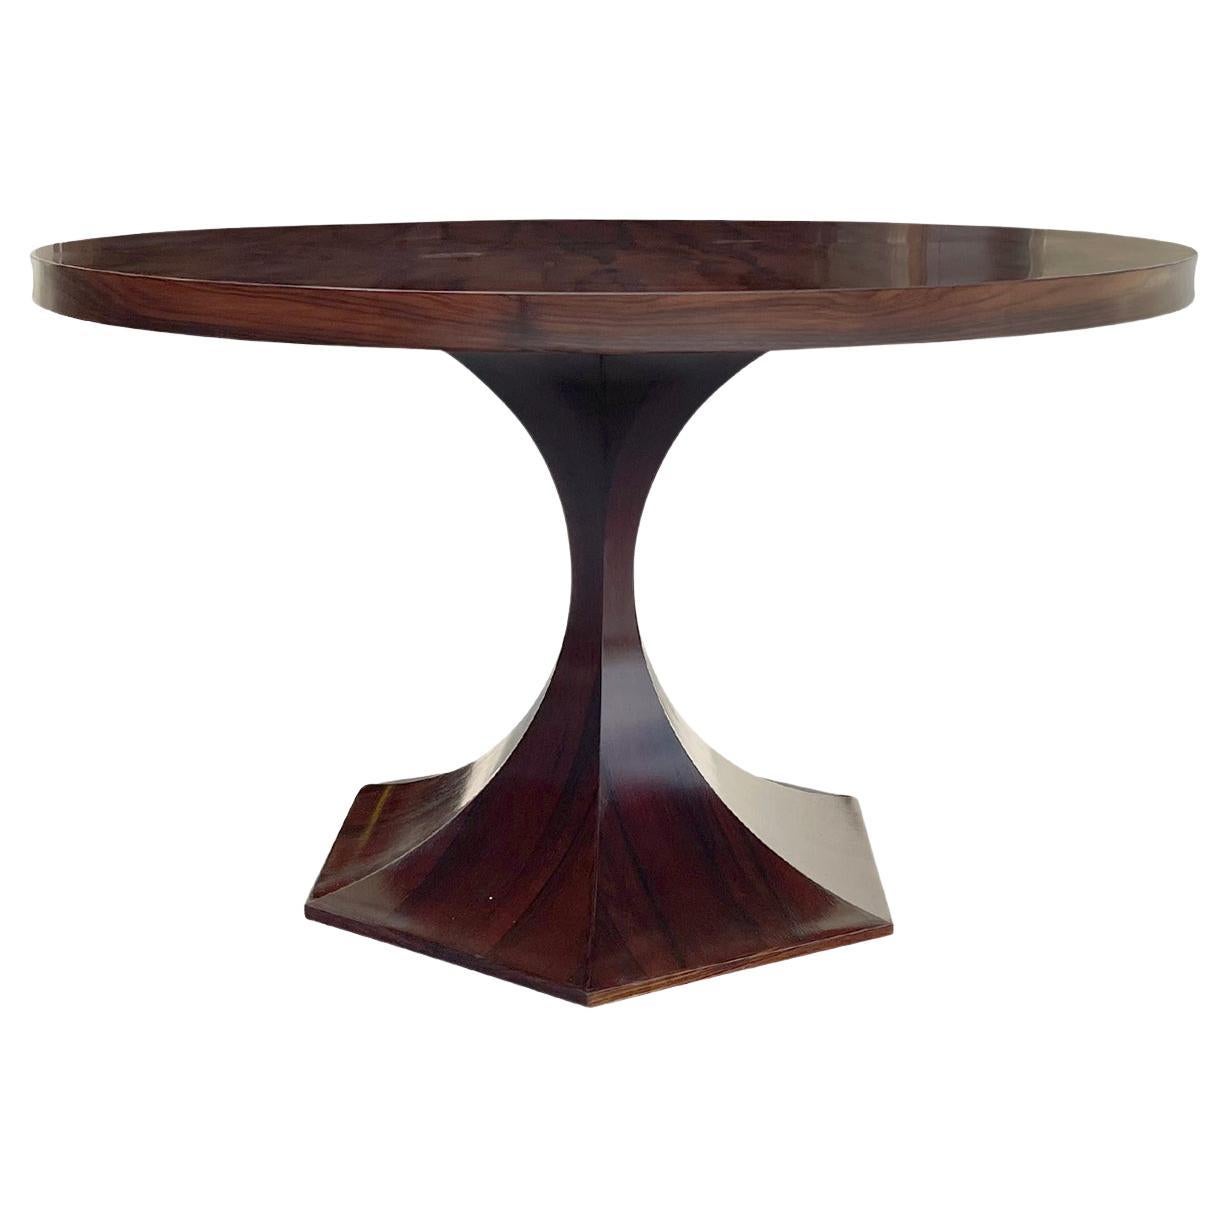 20th Century Italian Modern Vintage Polished Rosewood Dining, Center Table For Sale